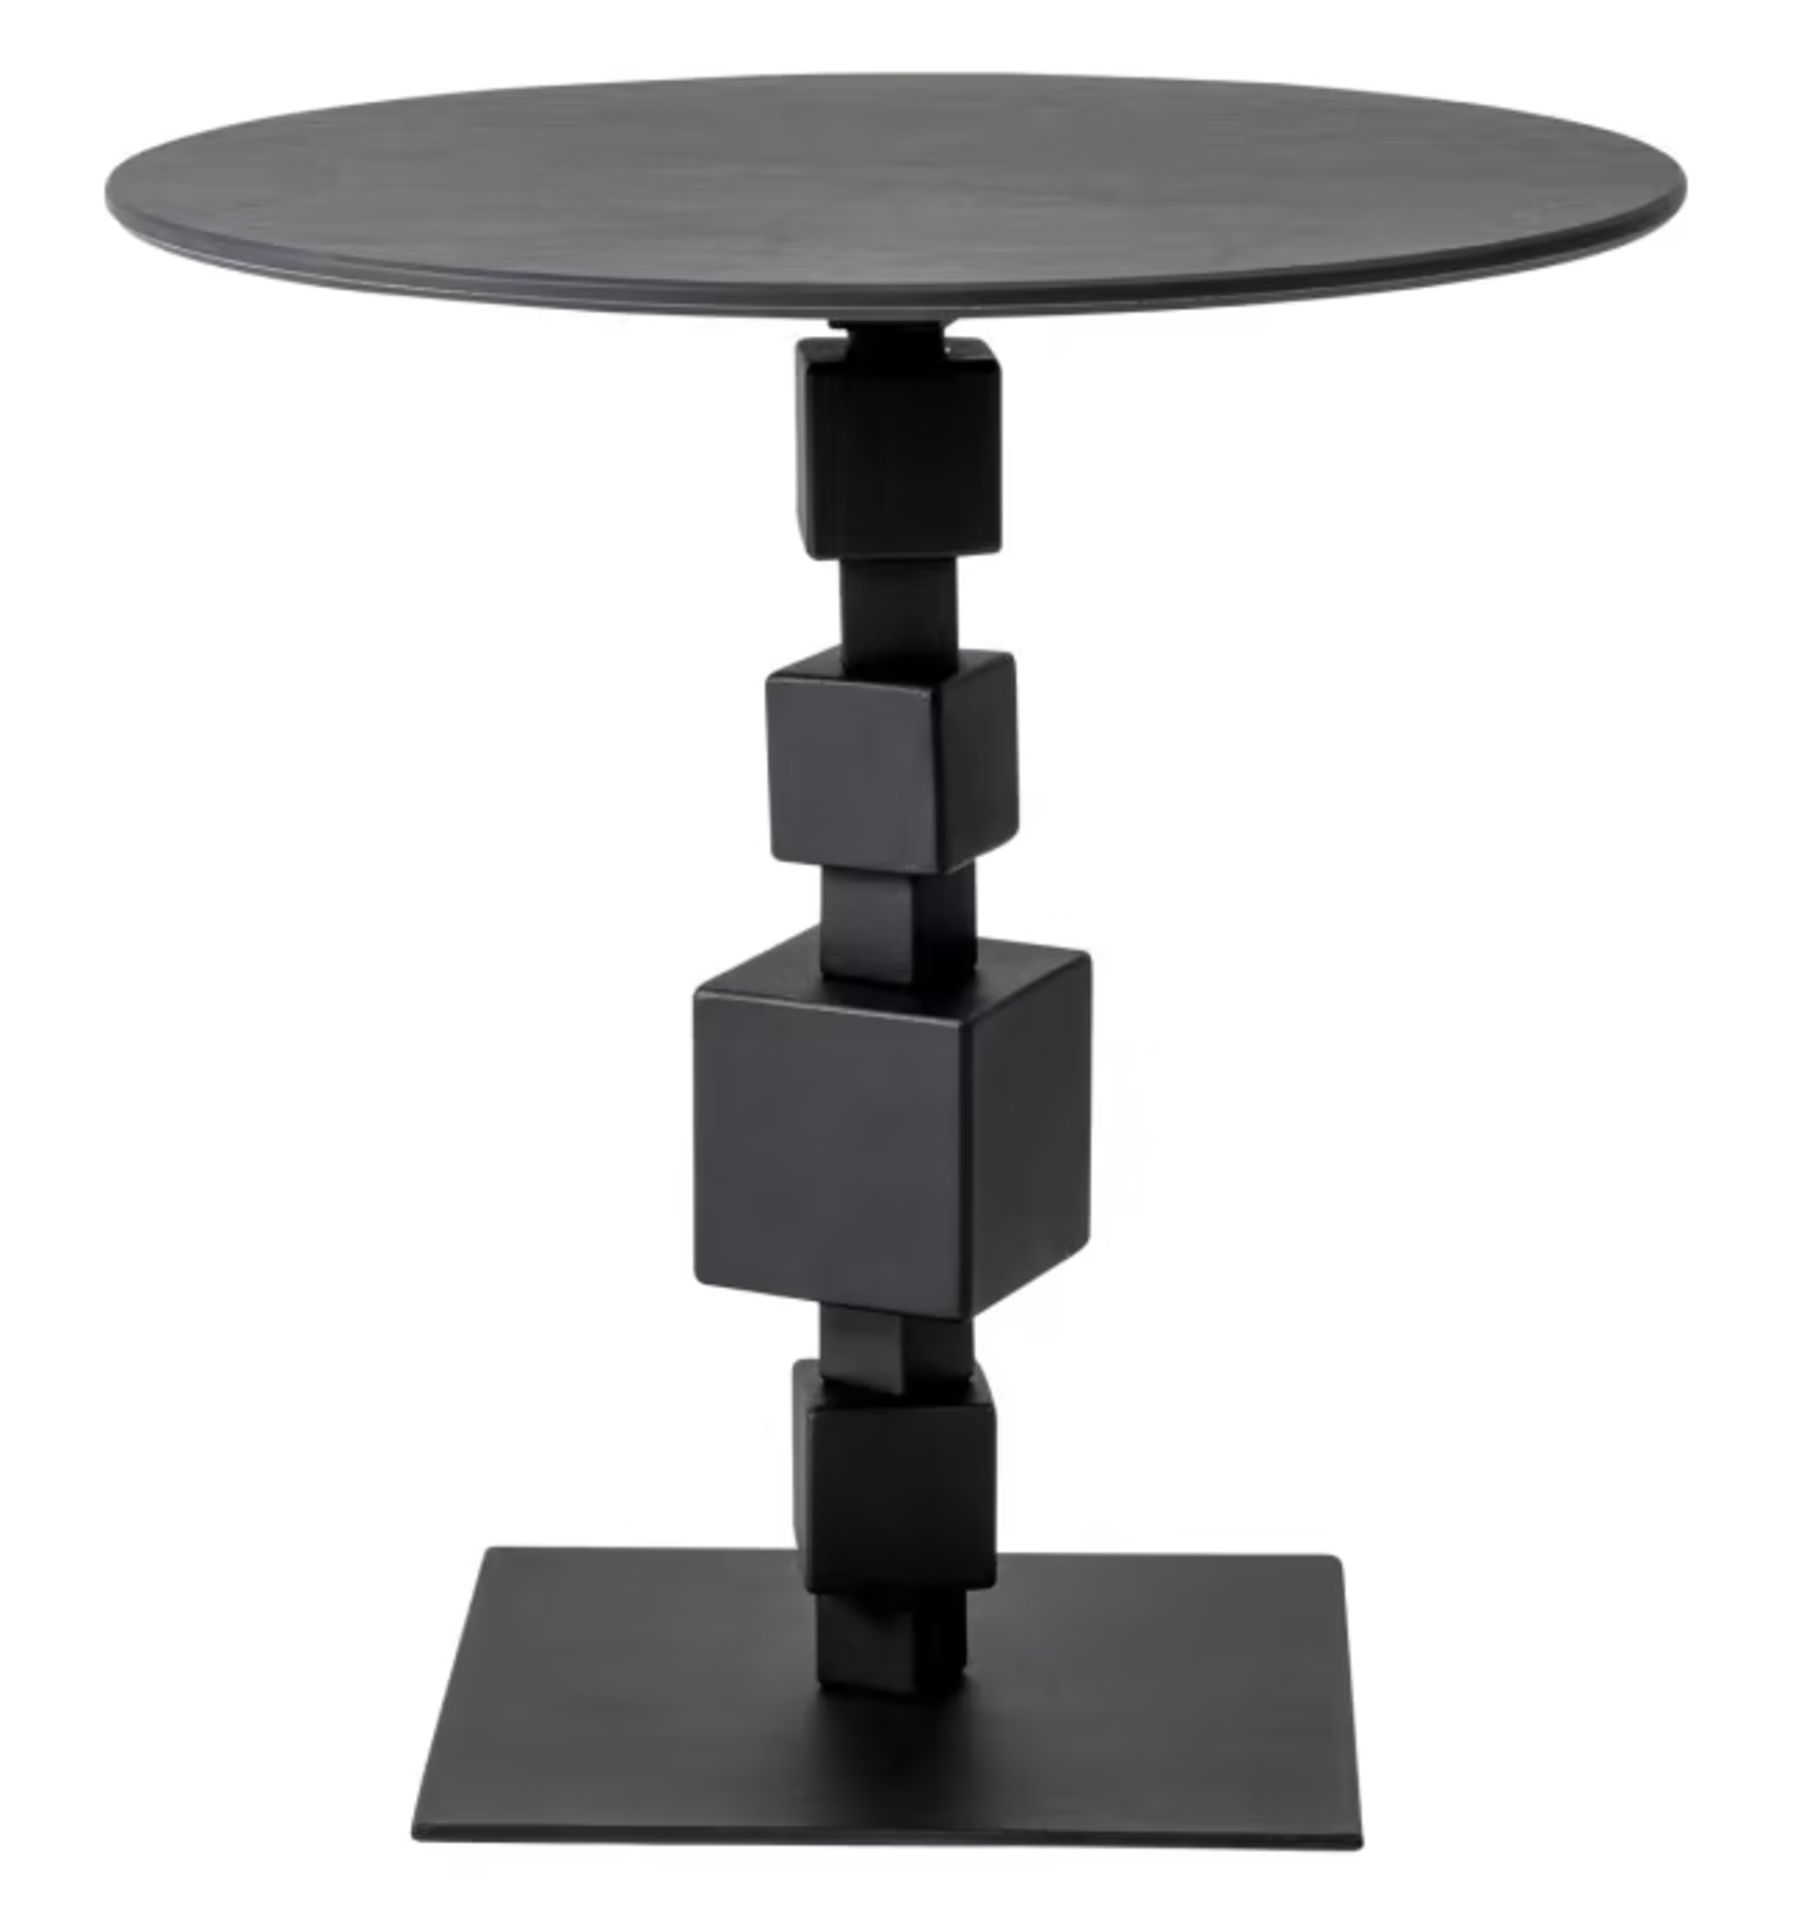 1 x NOLITA Occasional Side Table with a Cubed Metal Base, Bronzed Finish and Industrial - Image 8 of 9